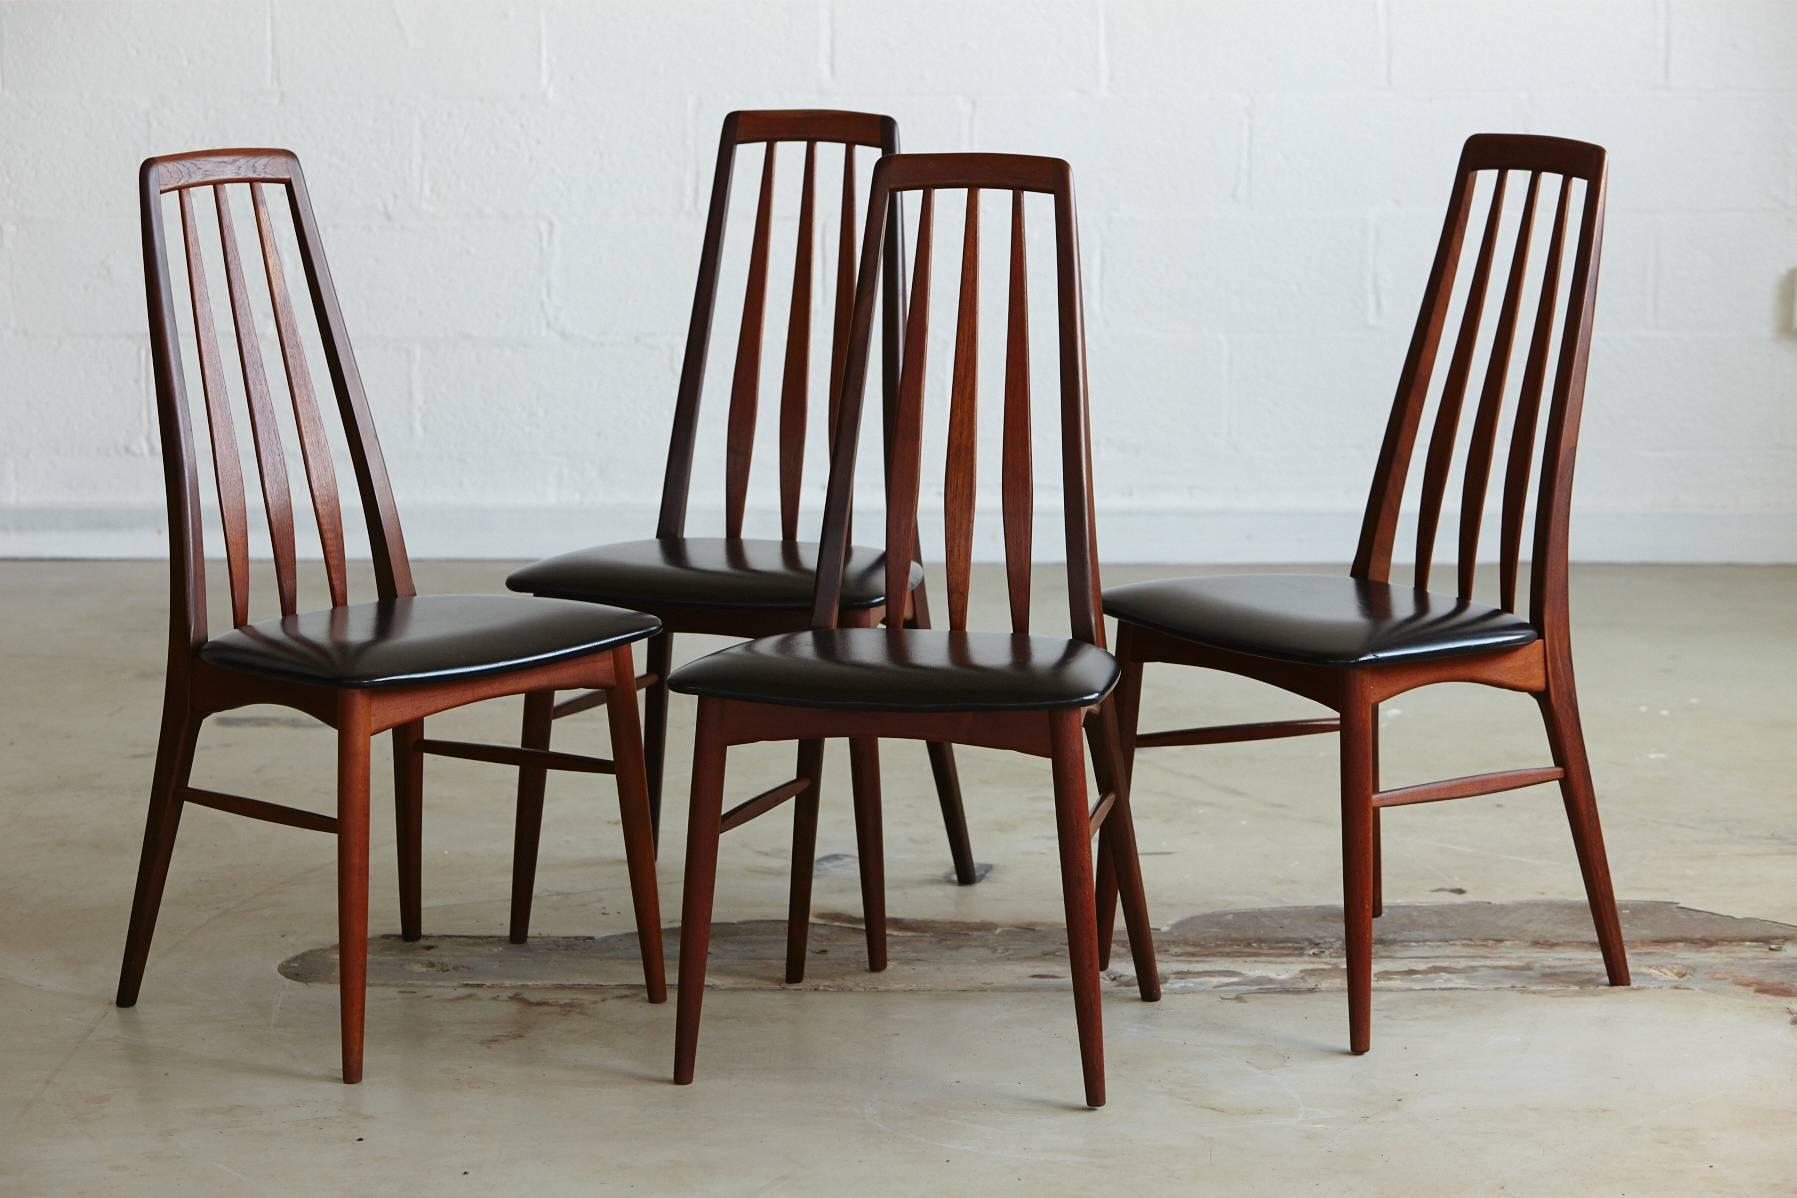 Beautiful set of four 'Eva' dining chairs in teak, designed by Niels Koefoed and manufactured by Koefoed Hornslet in Denmark, circa 1960s. 
all chairs show the 'Made in Denmark' stamp and the maker's mark.